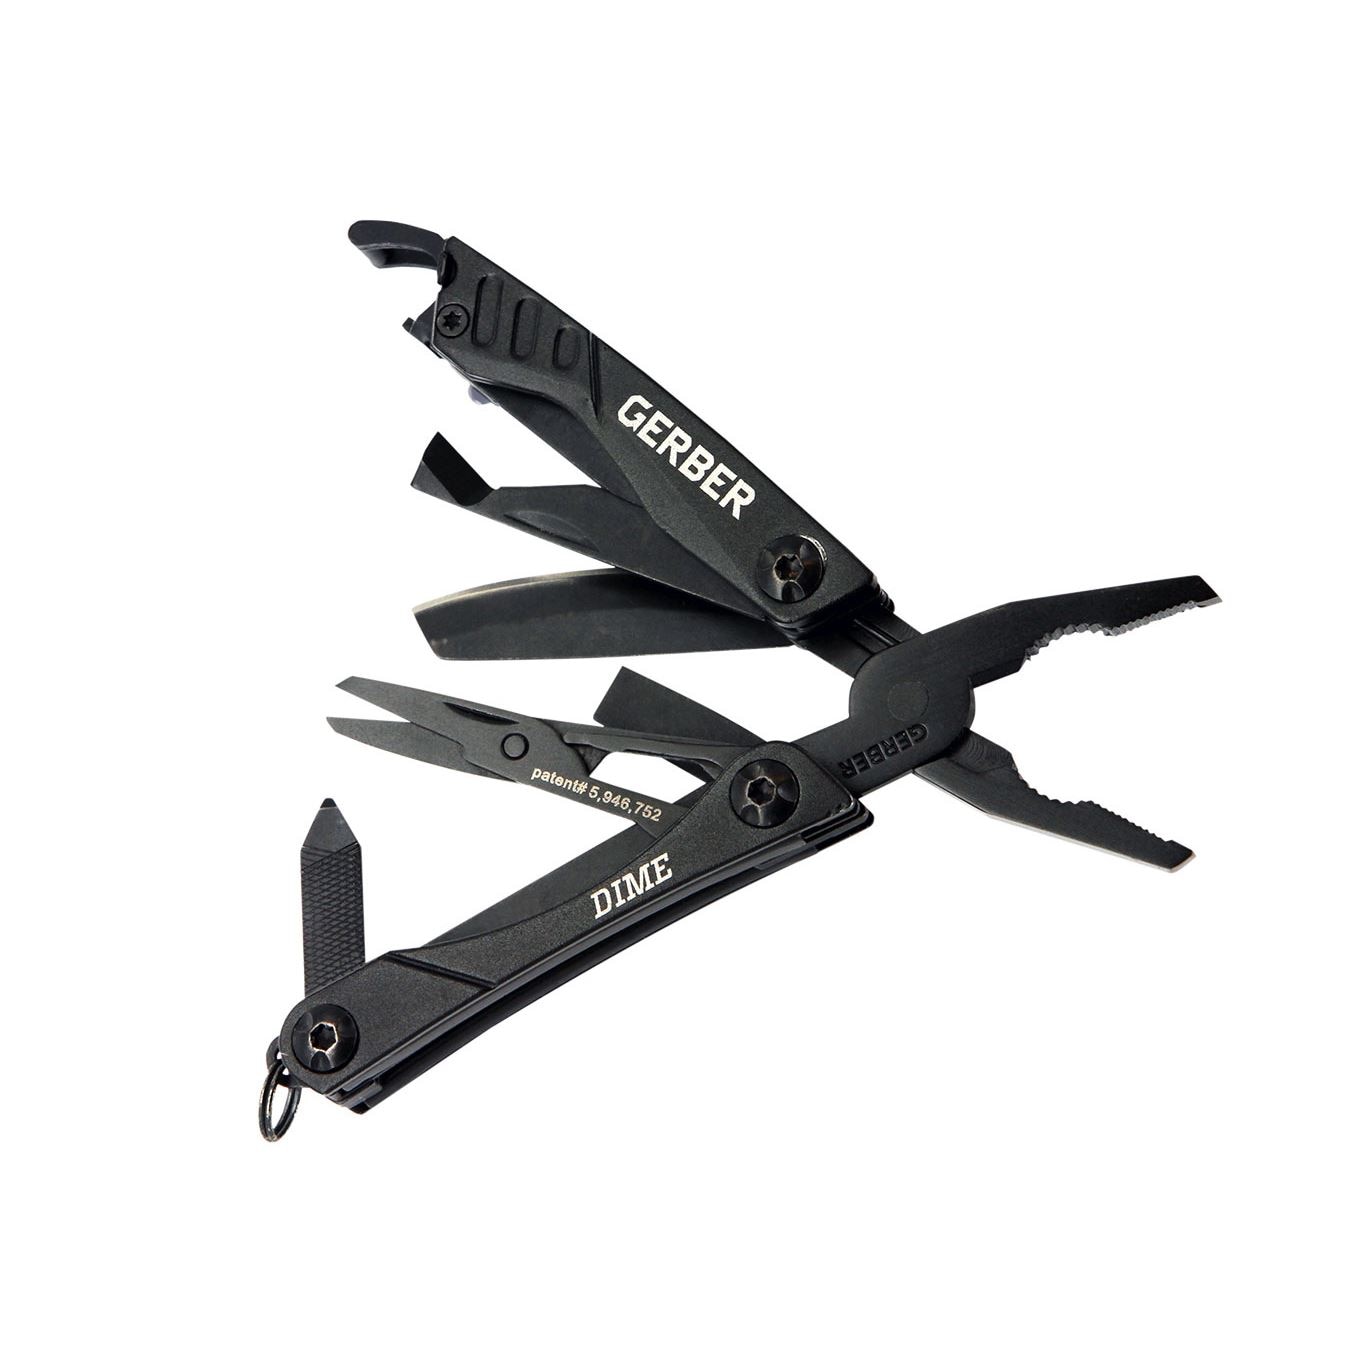 Gerber Dime Multitool, Survival Gear and Kits